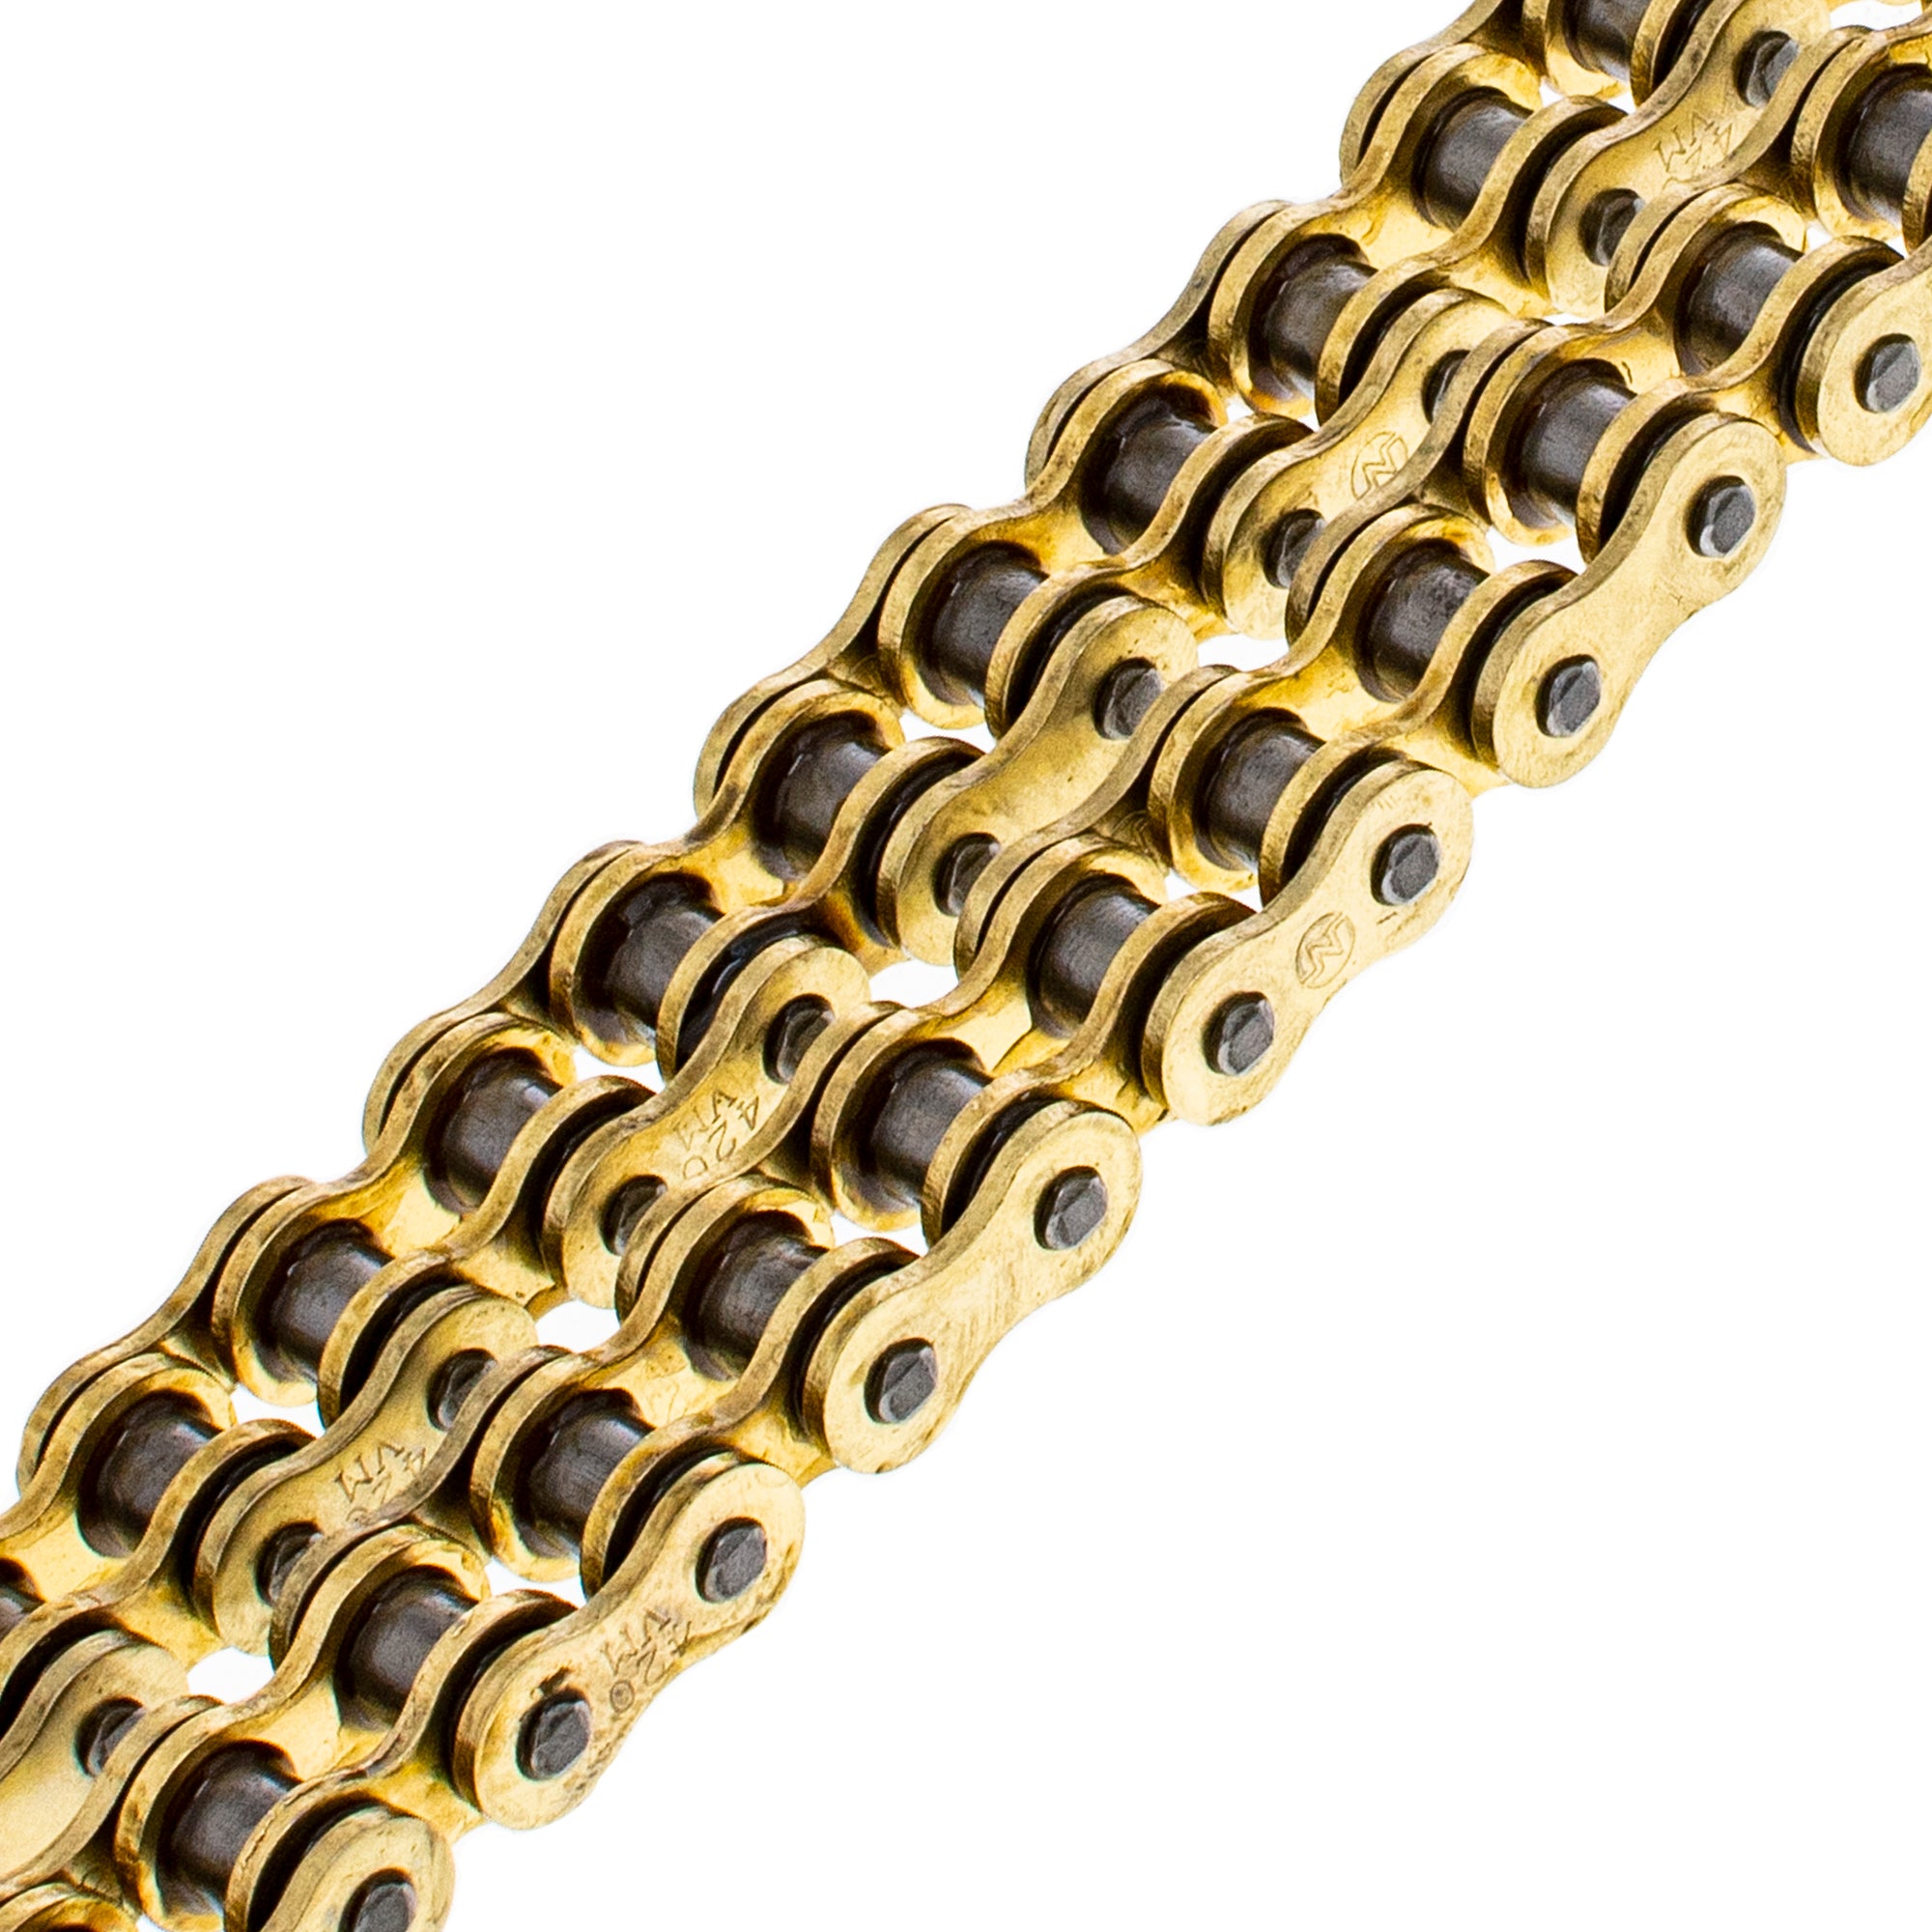 Gold X-Ring Chain 118 w/ Master Link for zOTHER Honda XR50R NS50F KX80 CR80R 5447 NICHE 519-CDC2558H